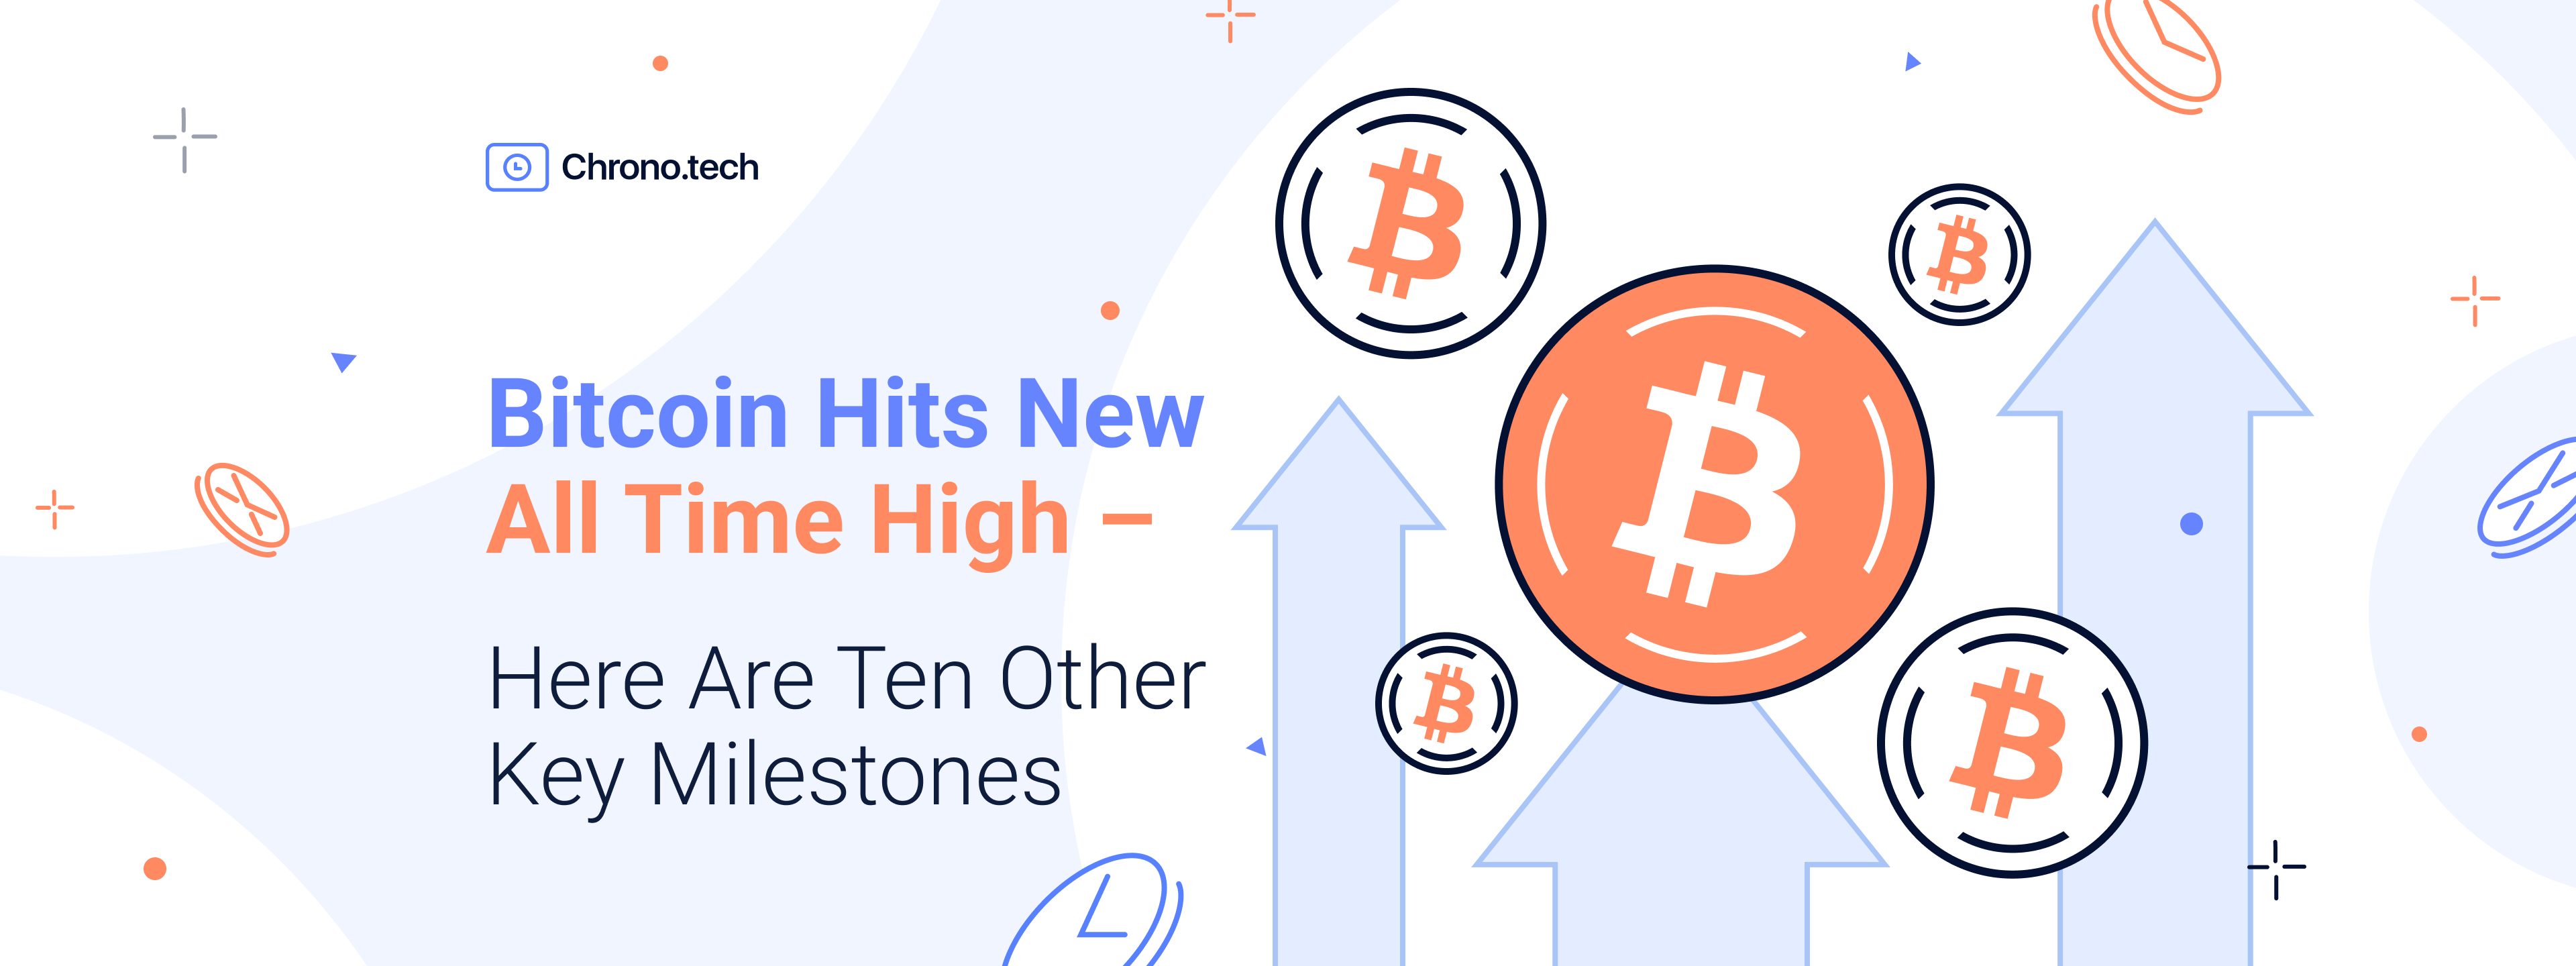 Bitcoin Hits New All-Time High – Here Are Ten Other Key Milestones